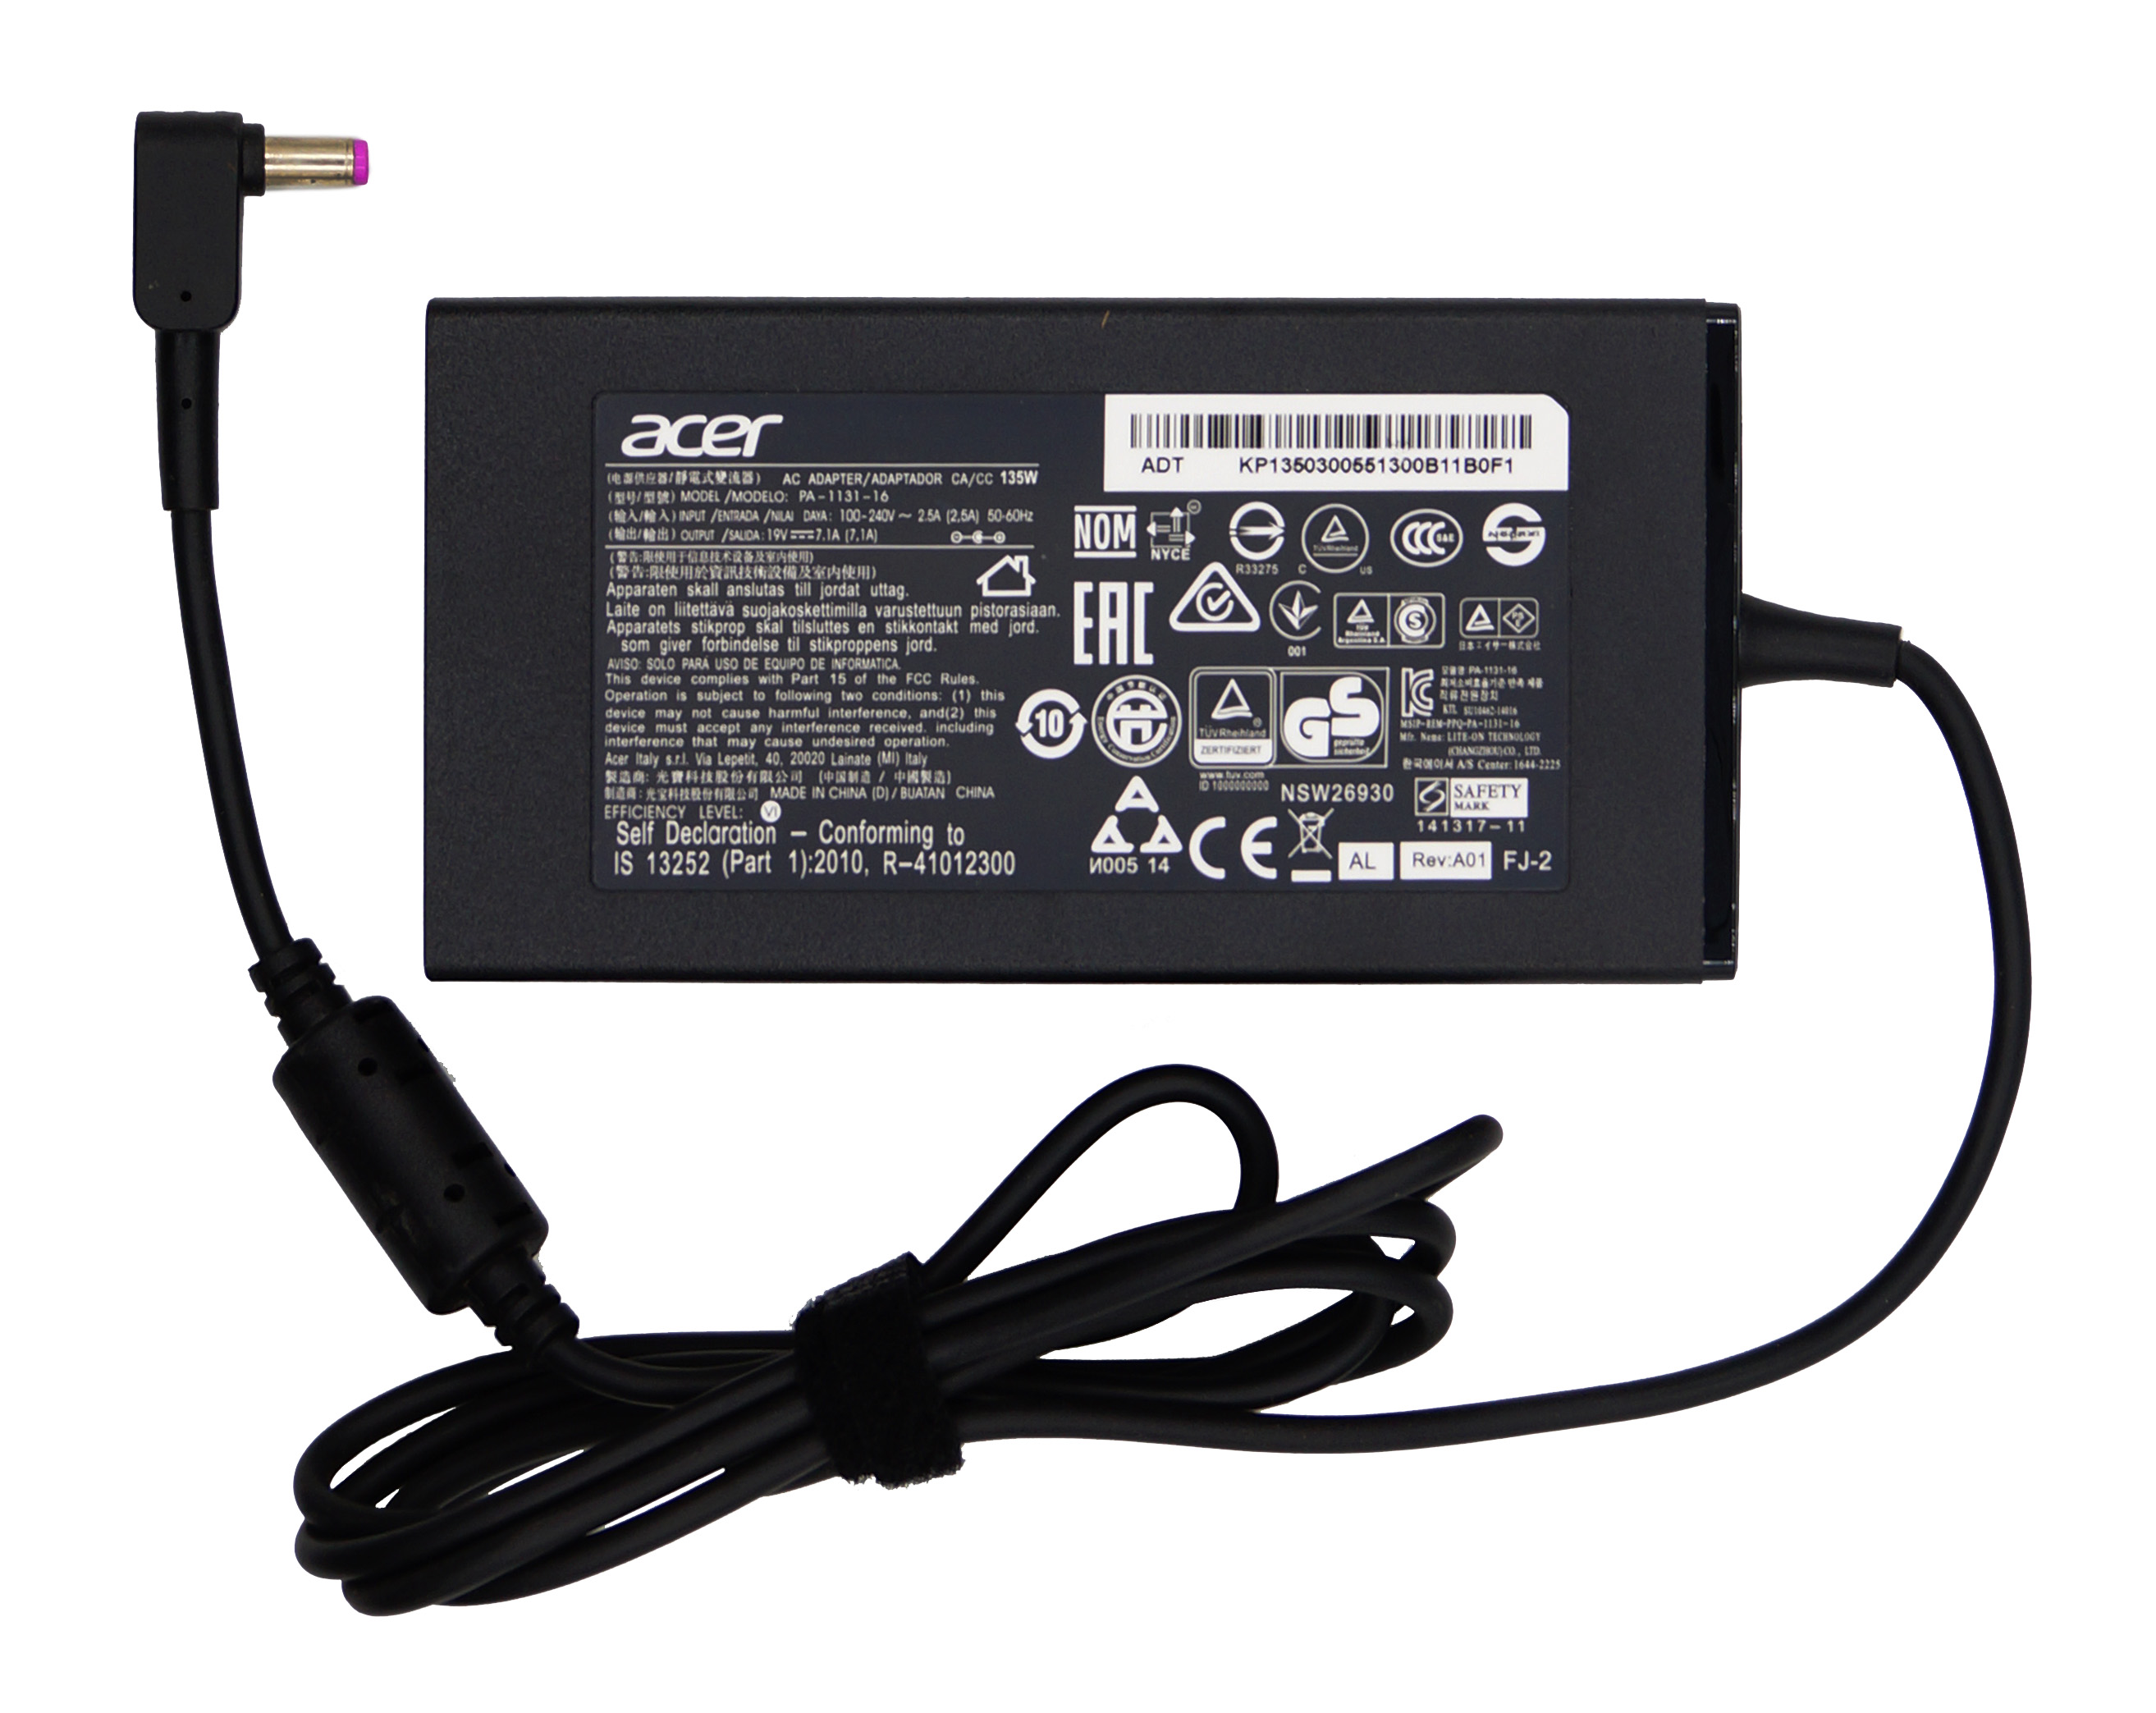   Acer 5.5x1.7, 135W (19V, 7.1A) ORG (new type)